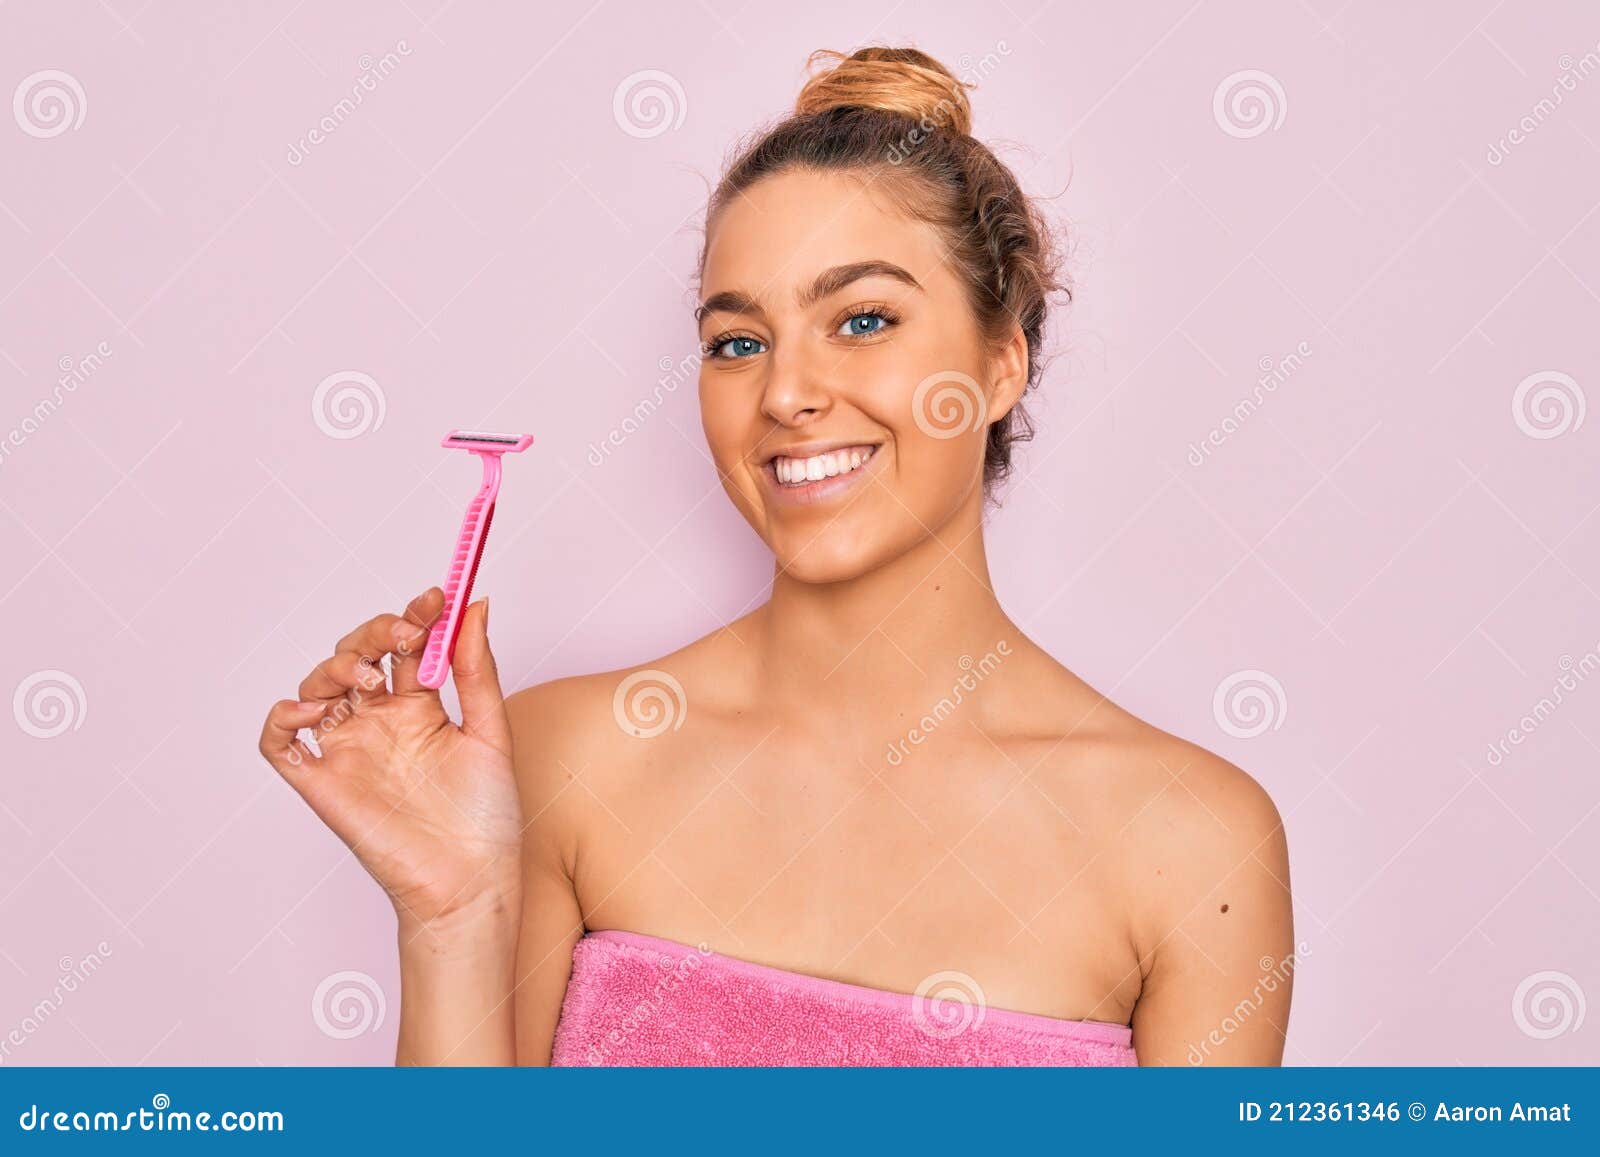 beautiful woman with blue eyes wearing towel shower after bath holding depilation razon with a happy face standing and smiling